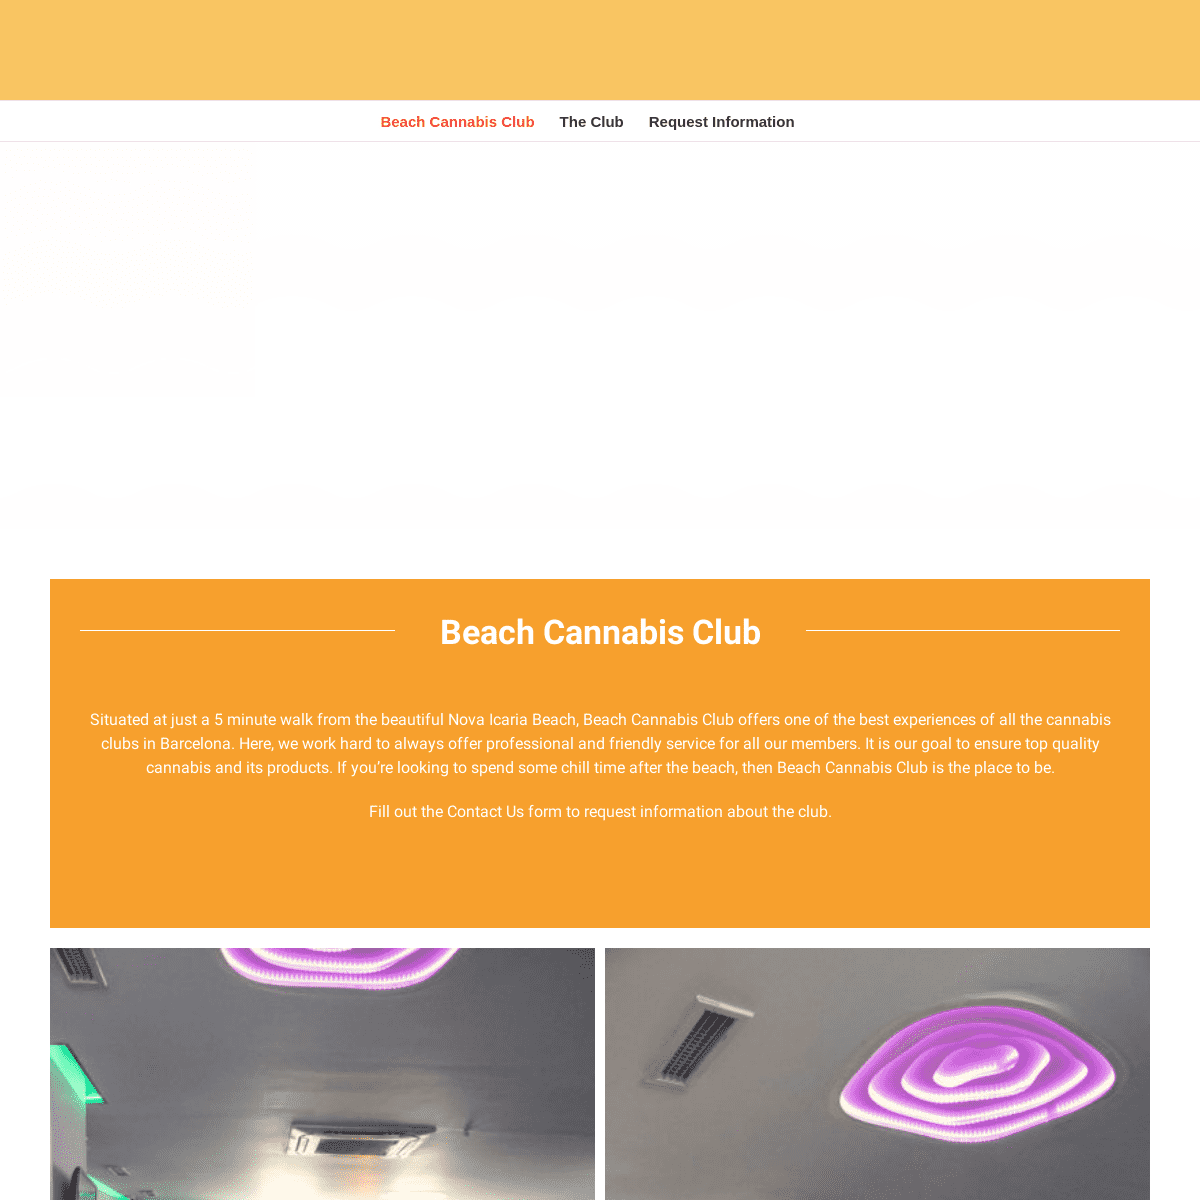 A complete backup of https://beachcannabisclub.com